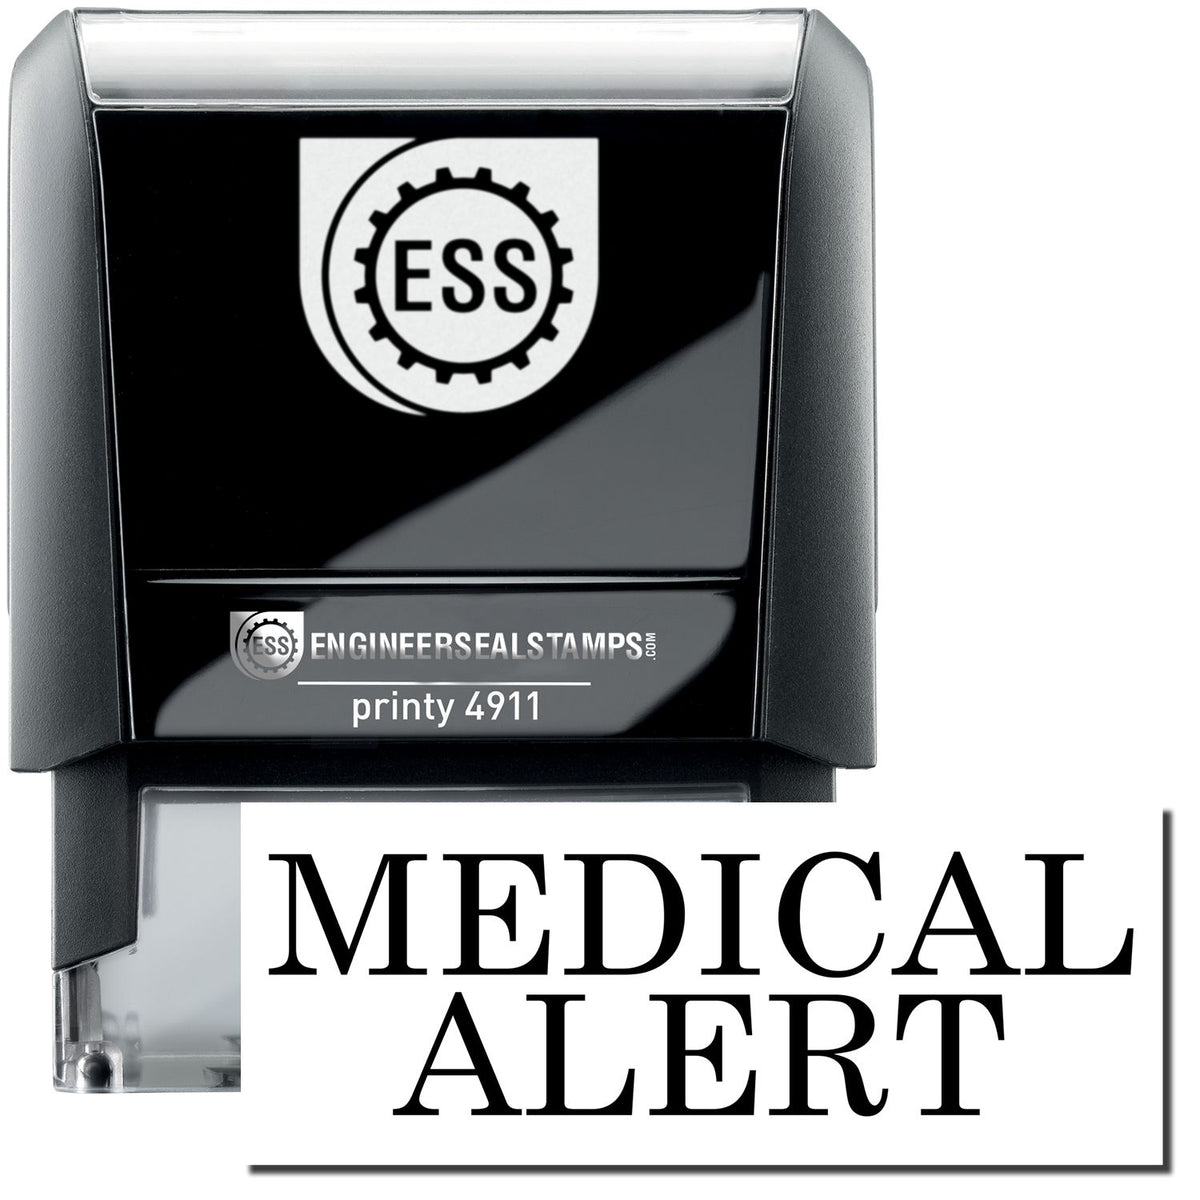 A self-inking stamp with a stamped image showing how the text &quot;MEDICAL ALERT&quot; is displayed after stamping.